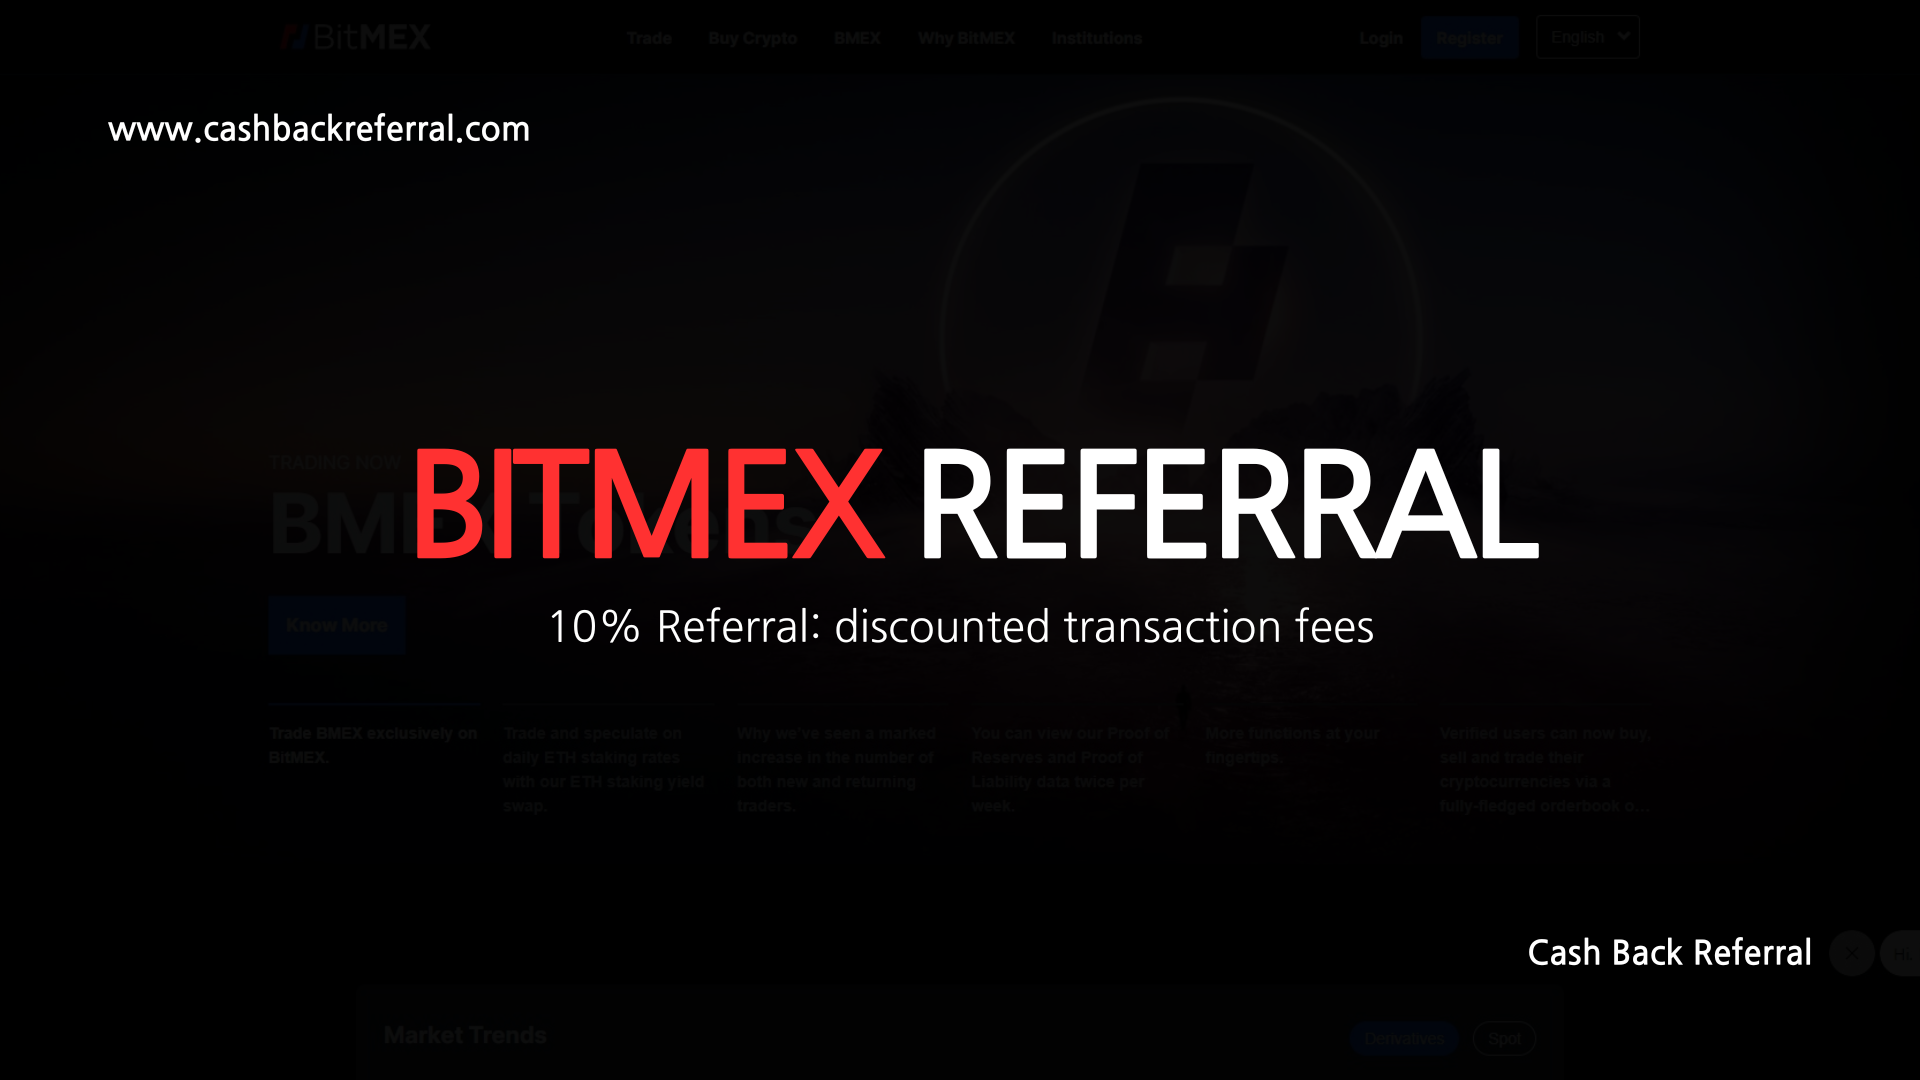 about bitmex referral promotion